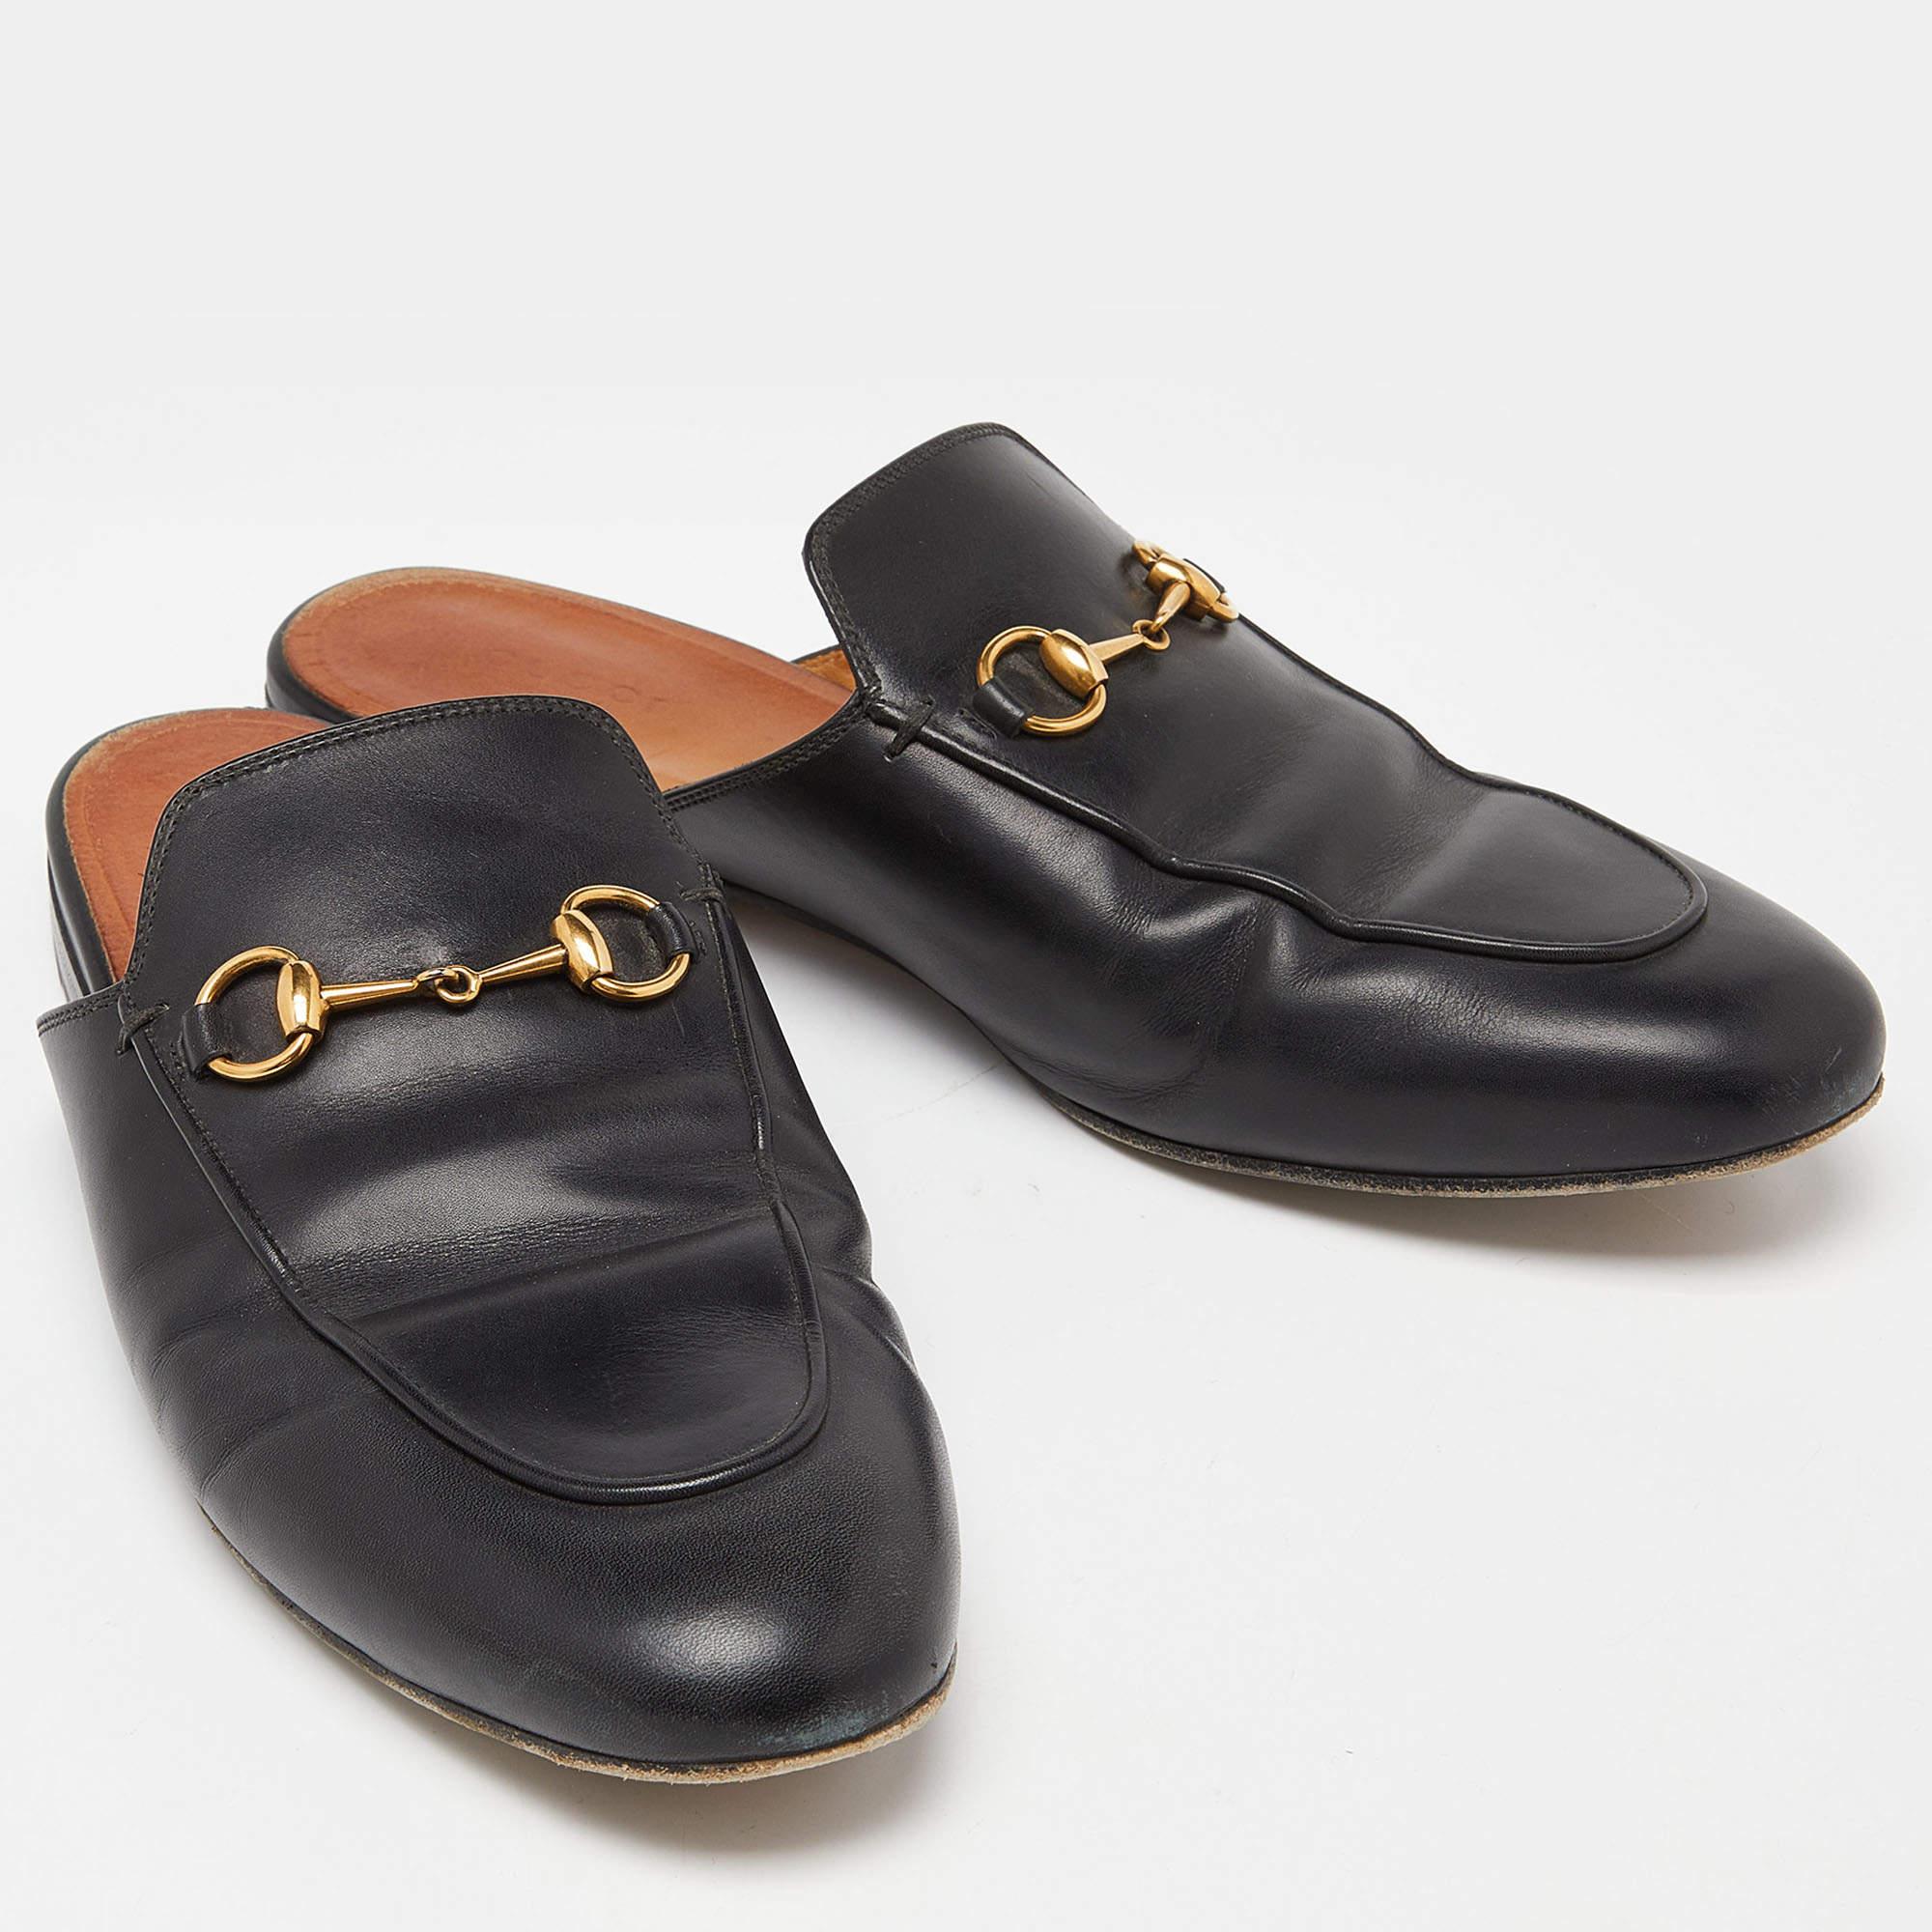 Gucci Black Leather Princetown Mules Size 40 4